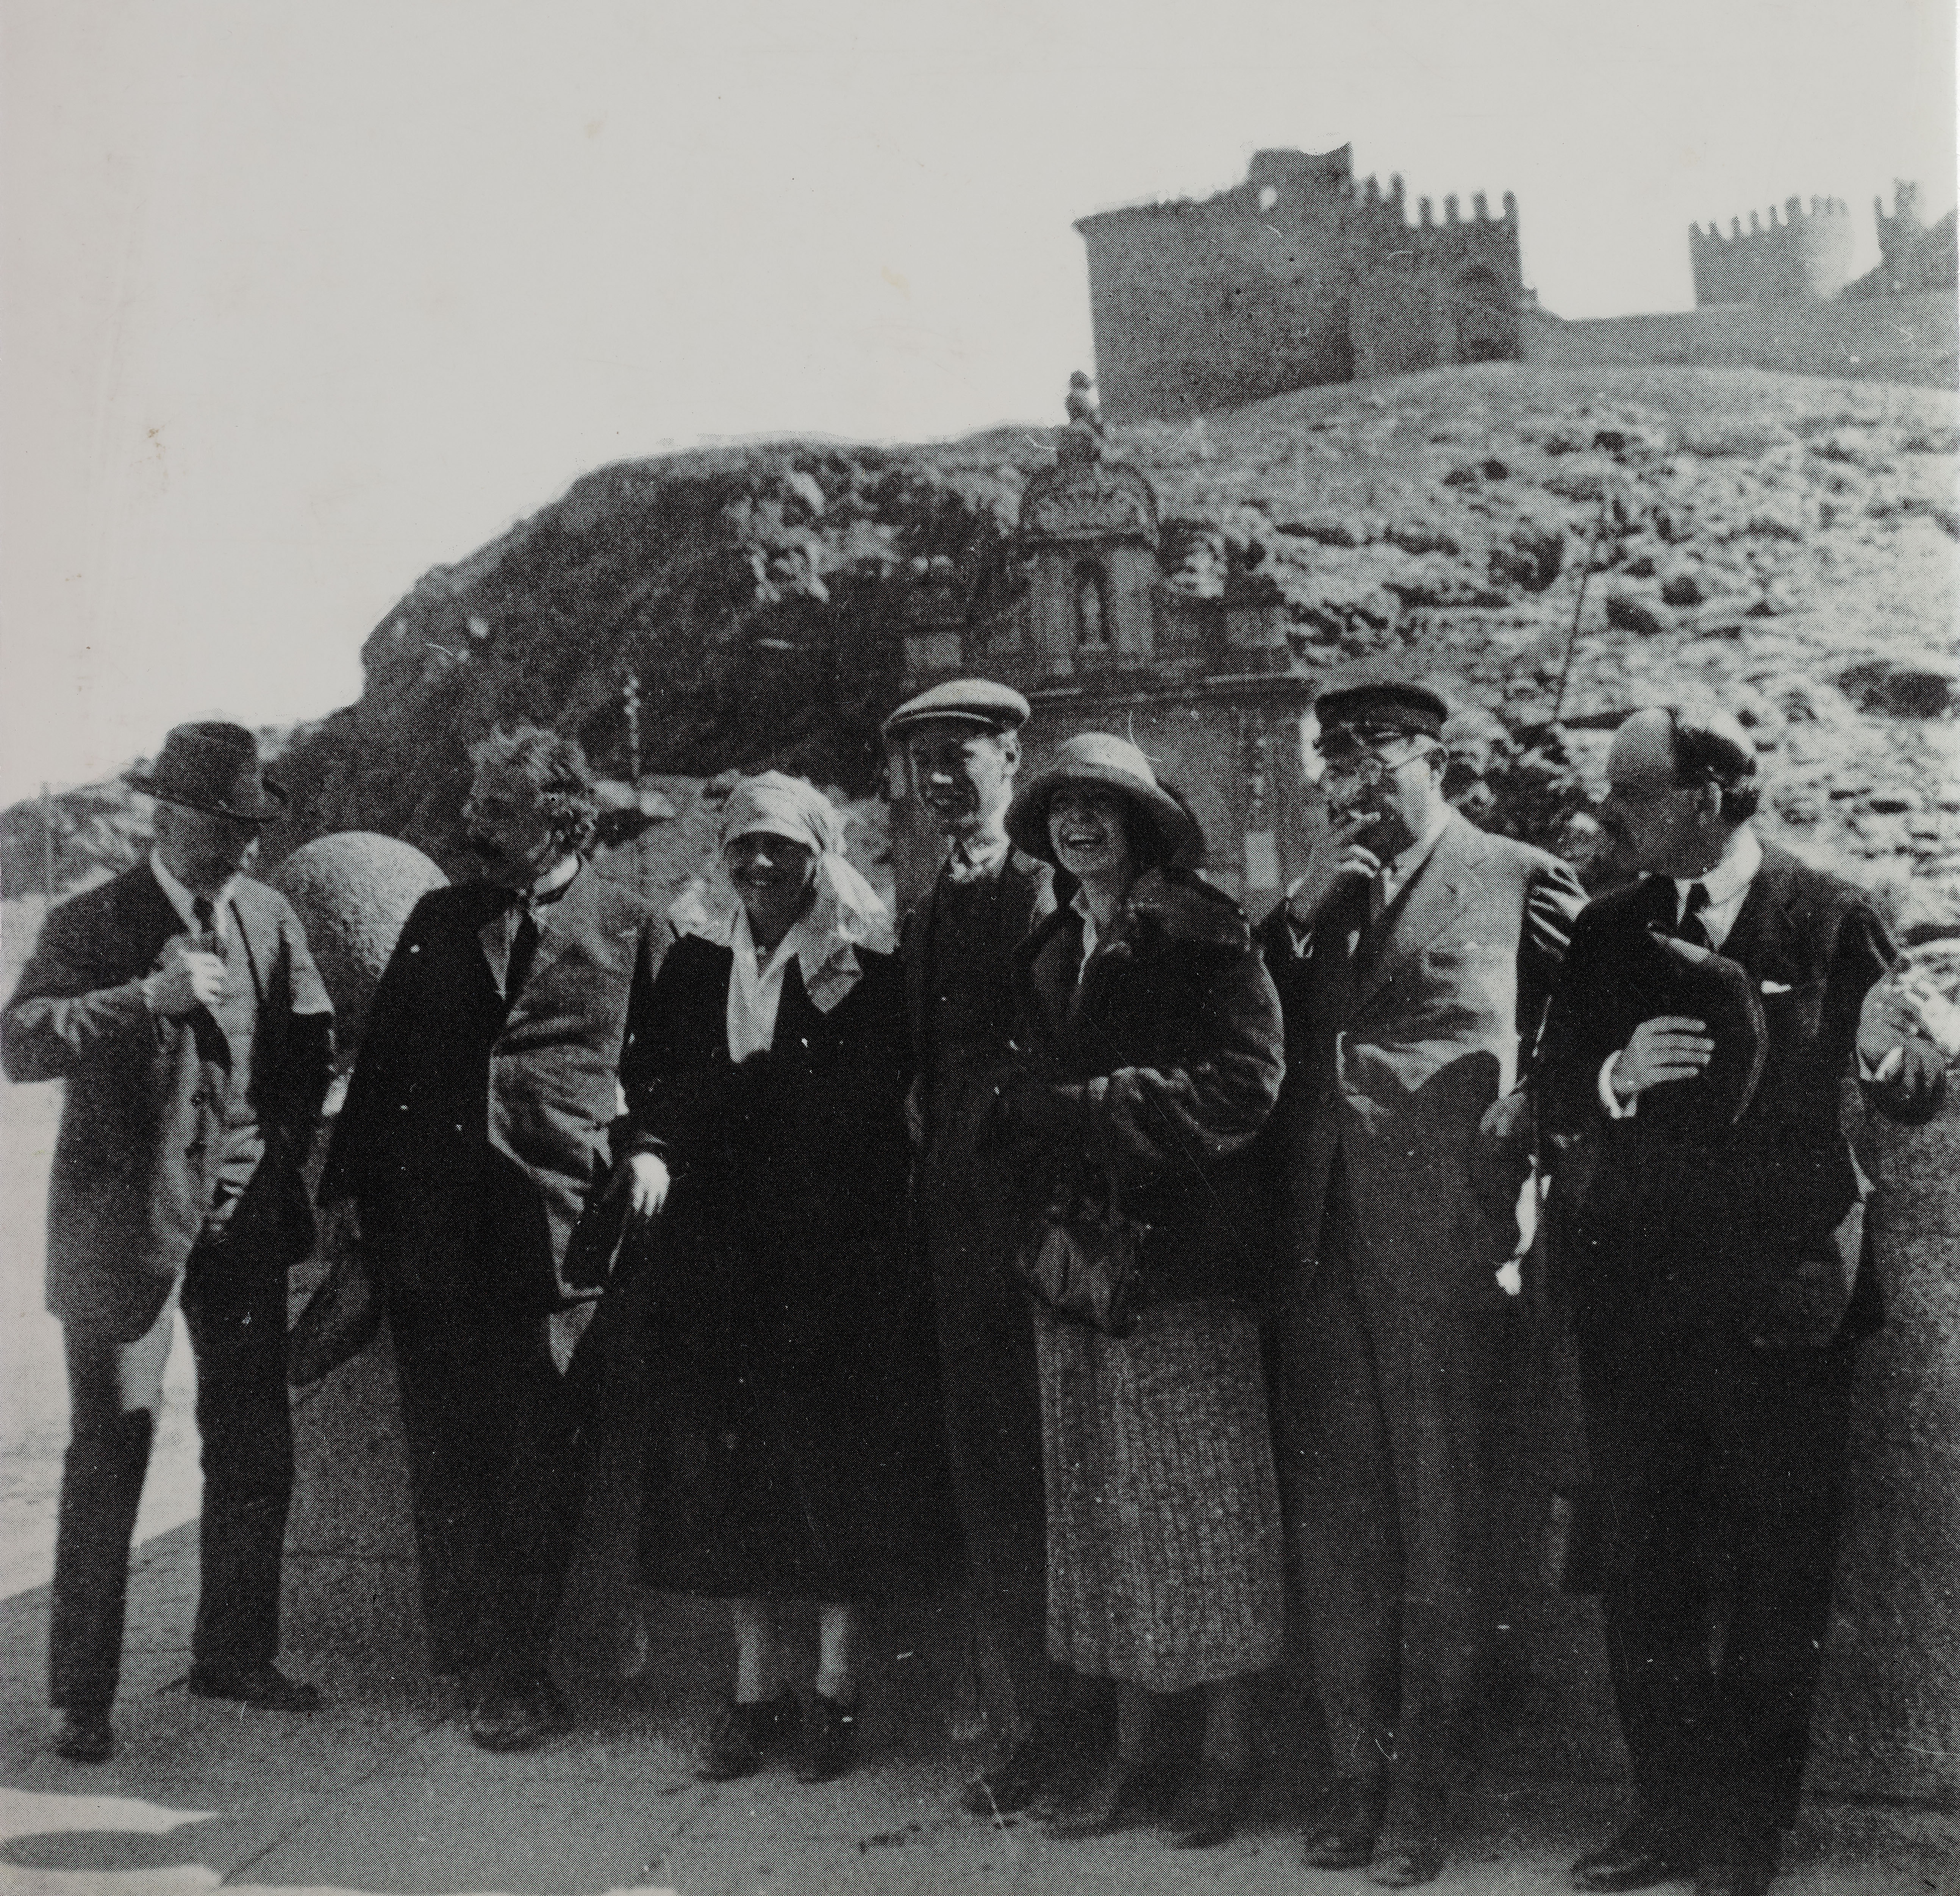 Photo of Karen Cortell Reisman’s grandparents Lina and Julius Kocherthaler with Einstein.  (Lina is to the right of Einstein, in a white kerchief, and Julius, in the cap, is beside her).